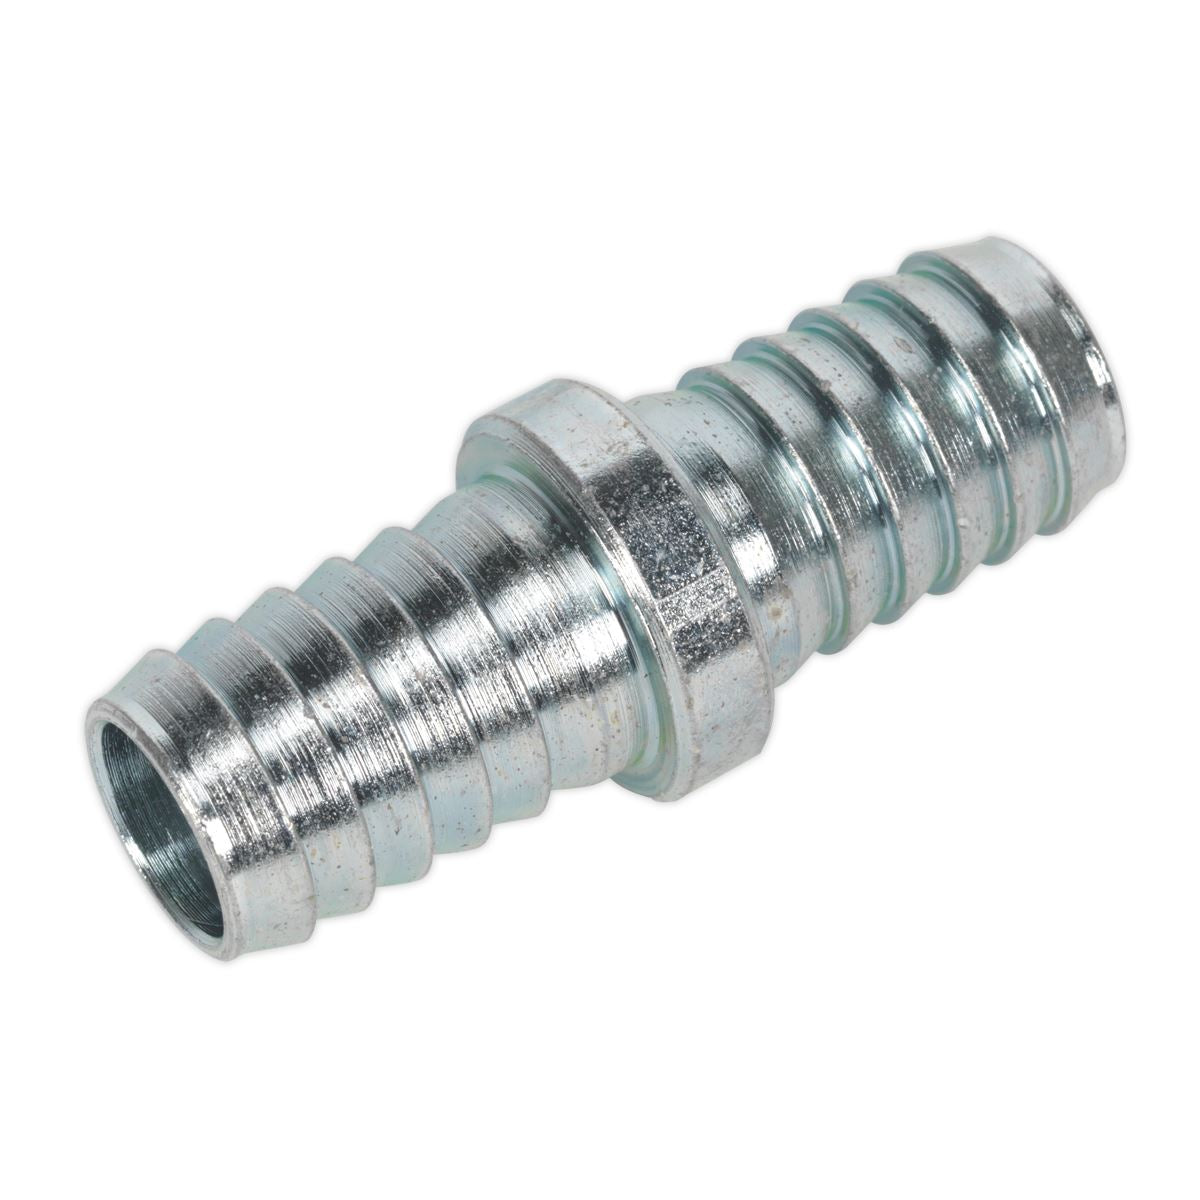 PCL Double End Hose Connector 1/2" Hose Pack of 2